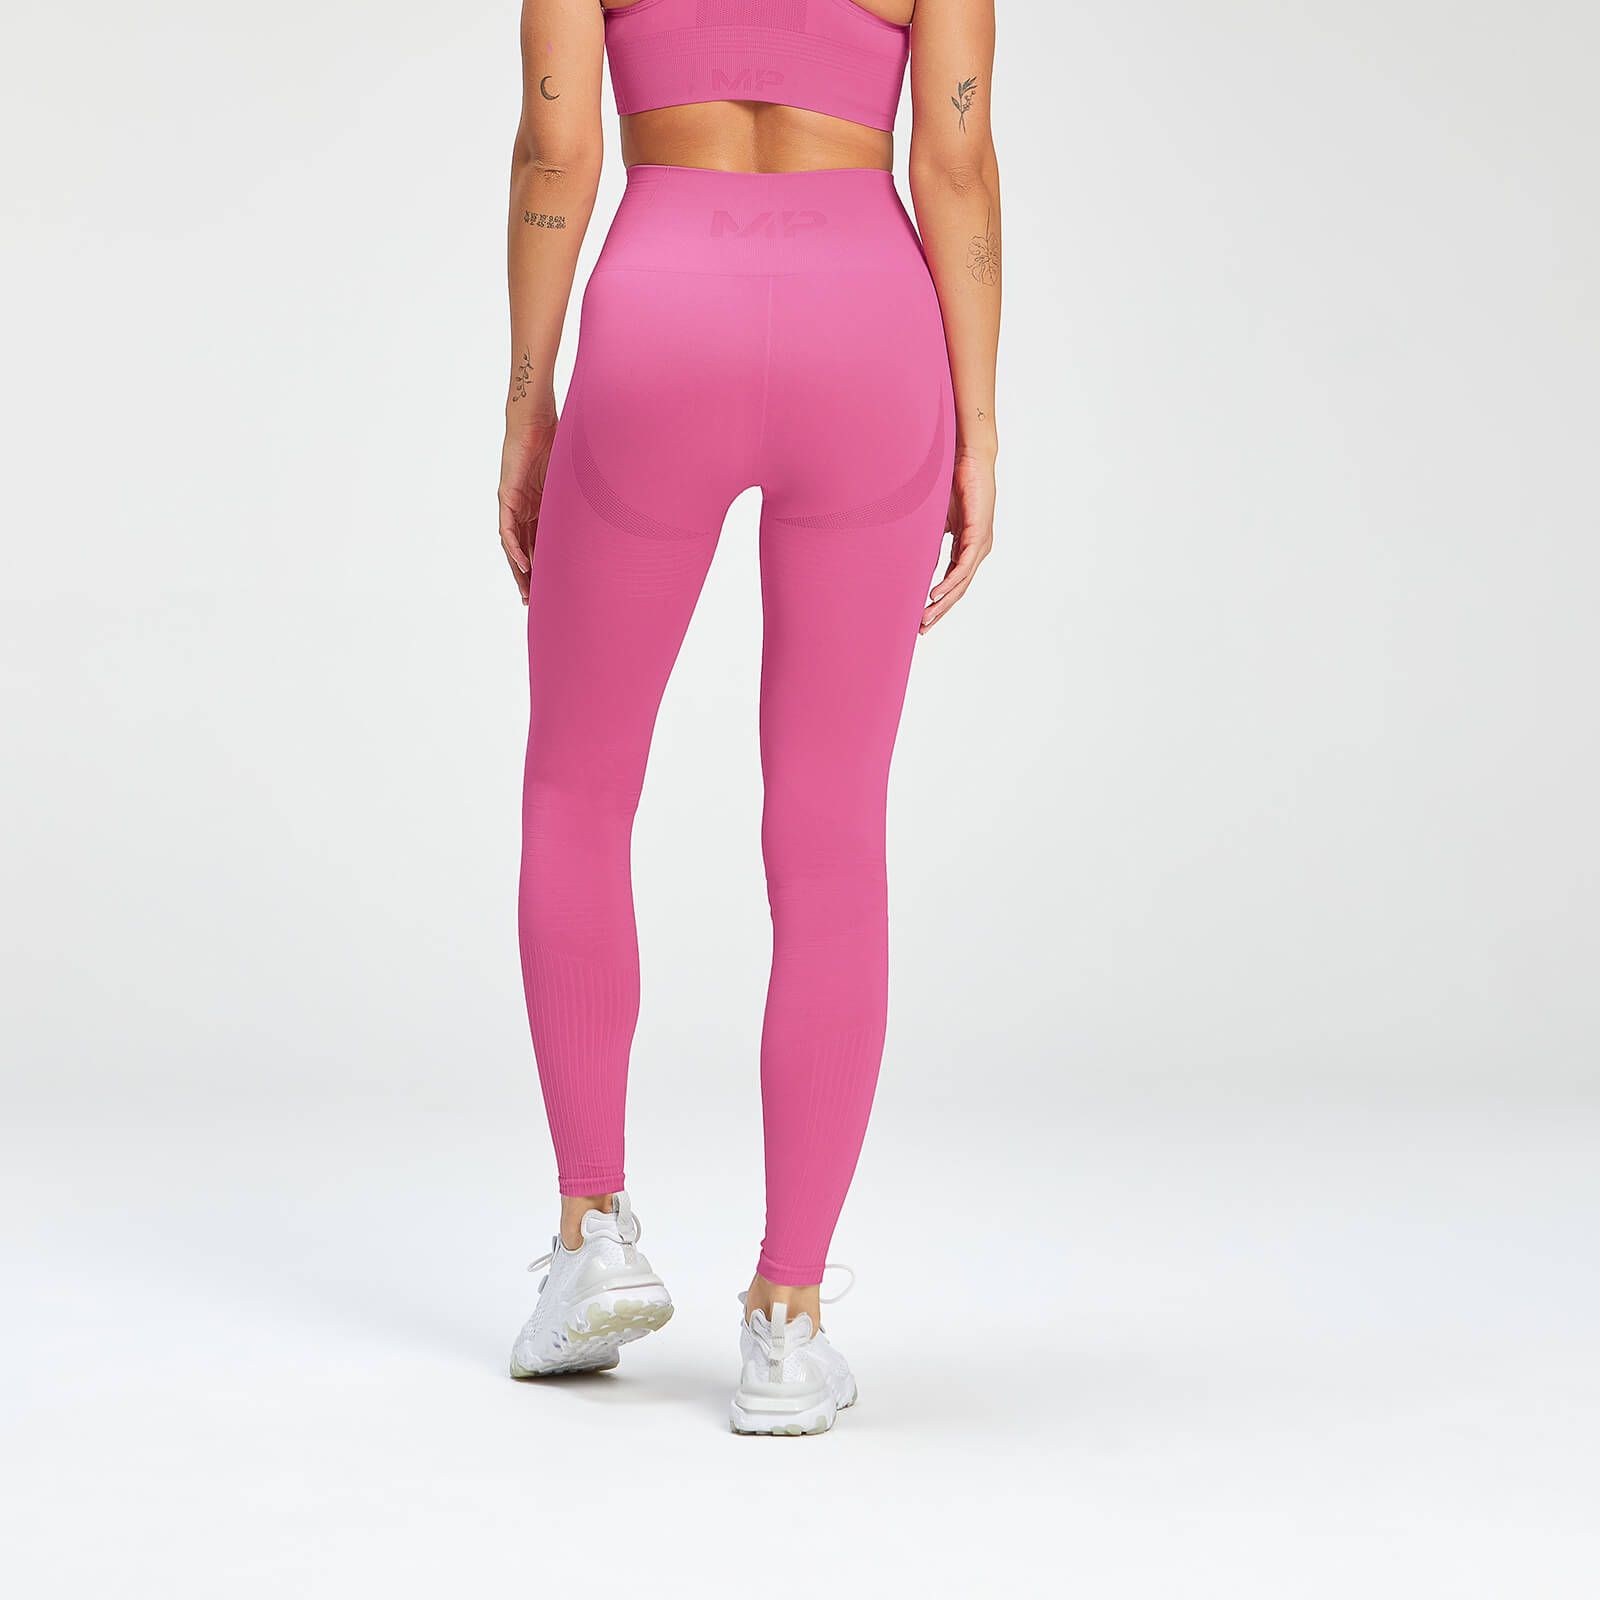 Introducing our NEW high waisted and sculpting Tempo Seamless leggings, optimised for high energy and impact interval and agility training.

The leggings are part of a vibrant matching collection and have a soft knitted seamless design and zonal ventilation. Their hydropholic finish ensure maximum sweat-wicking making them perfect for high sweat training.